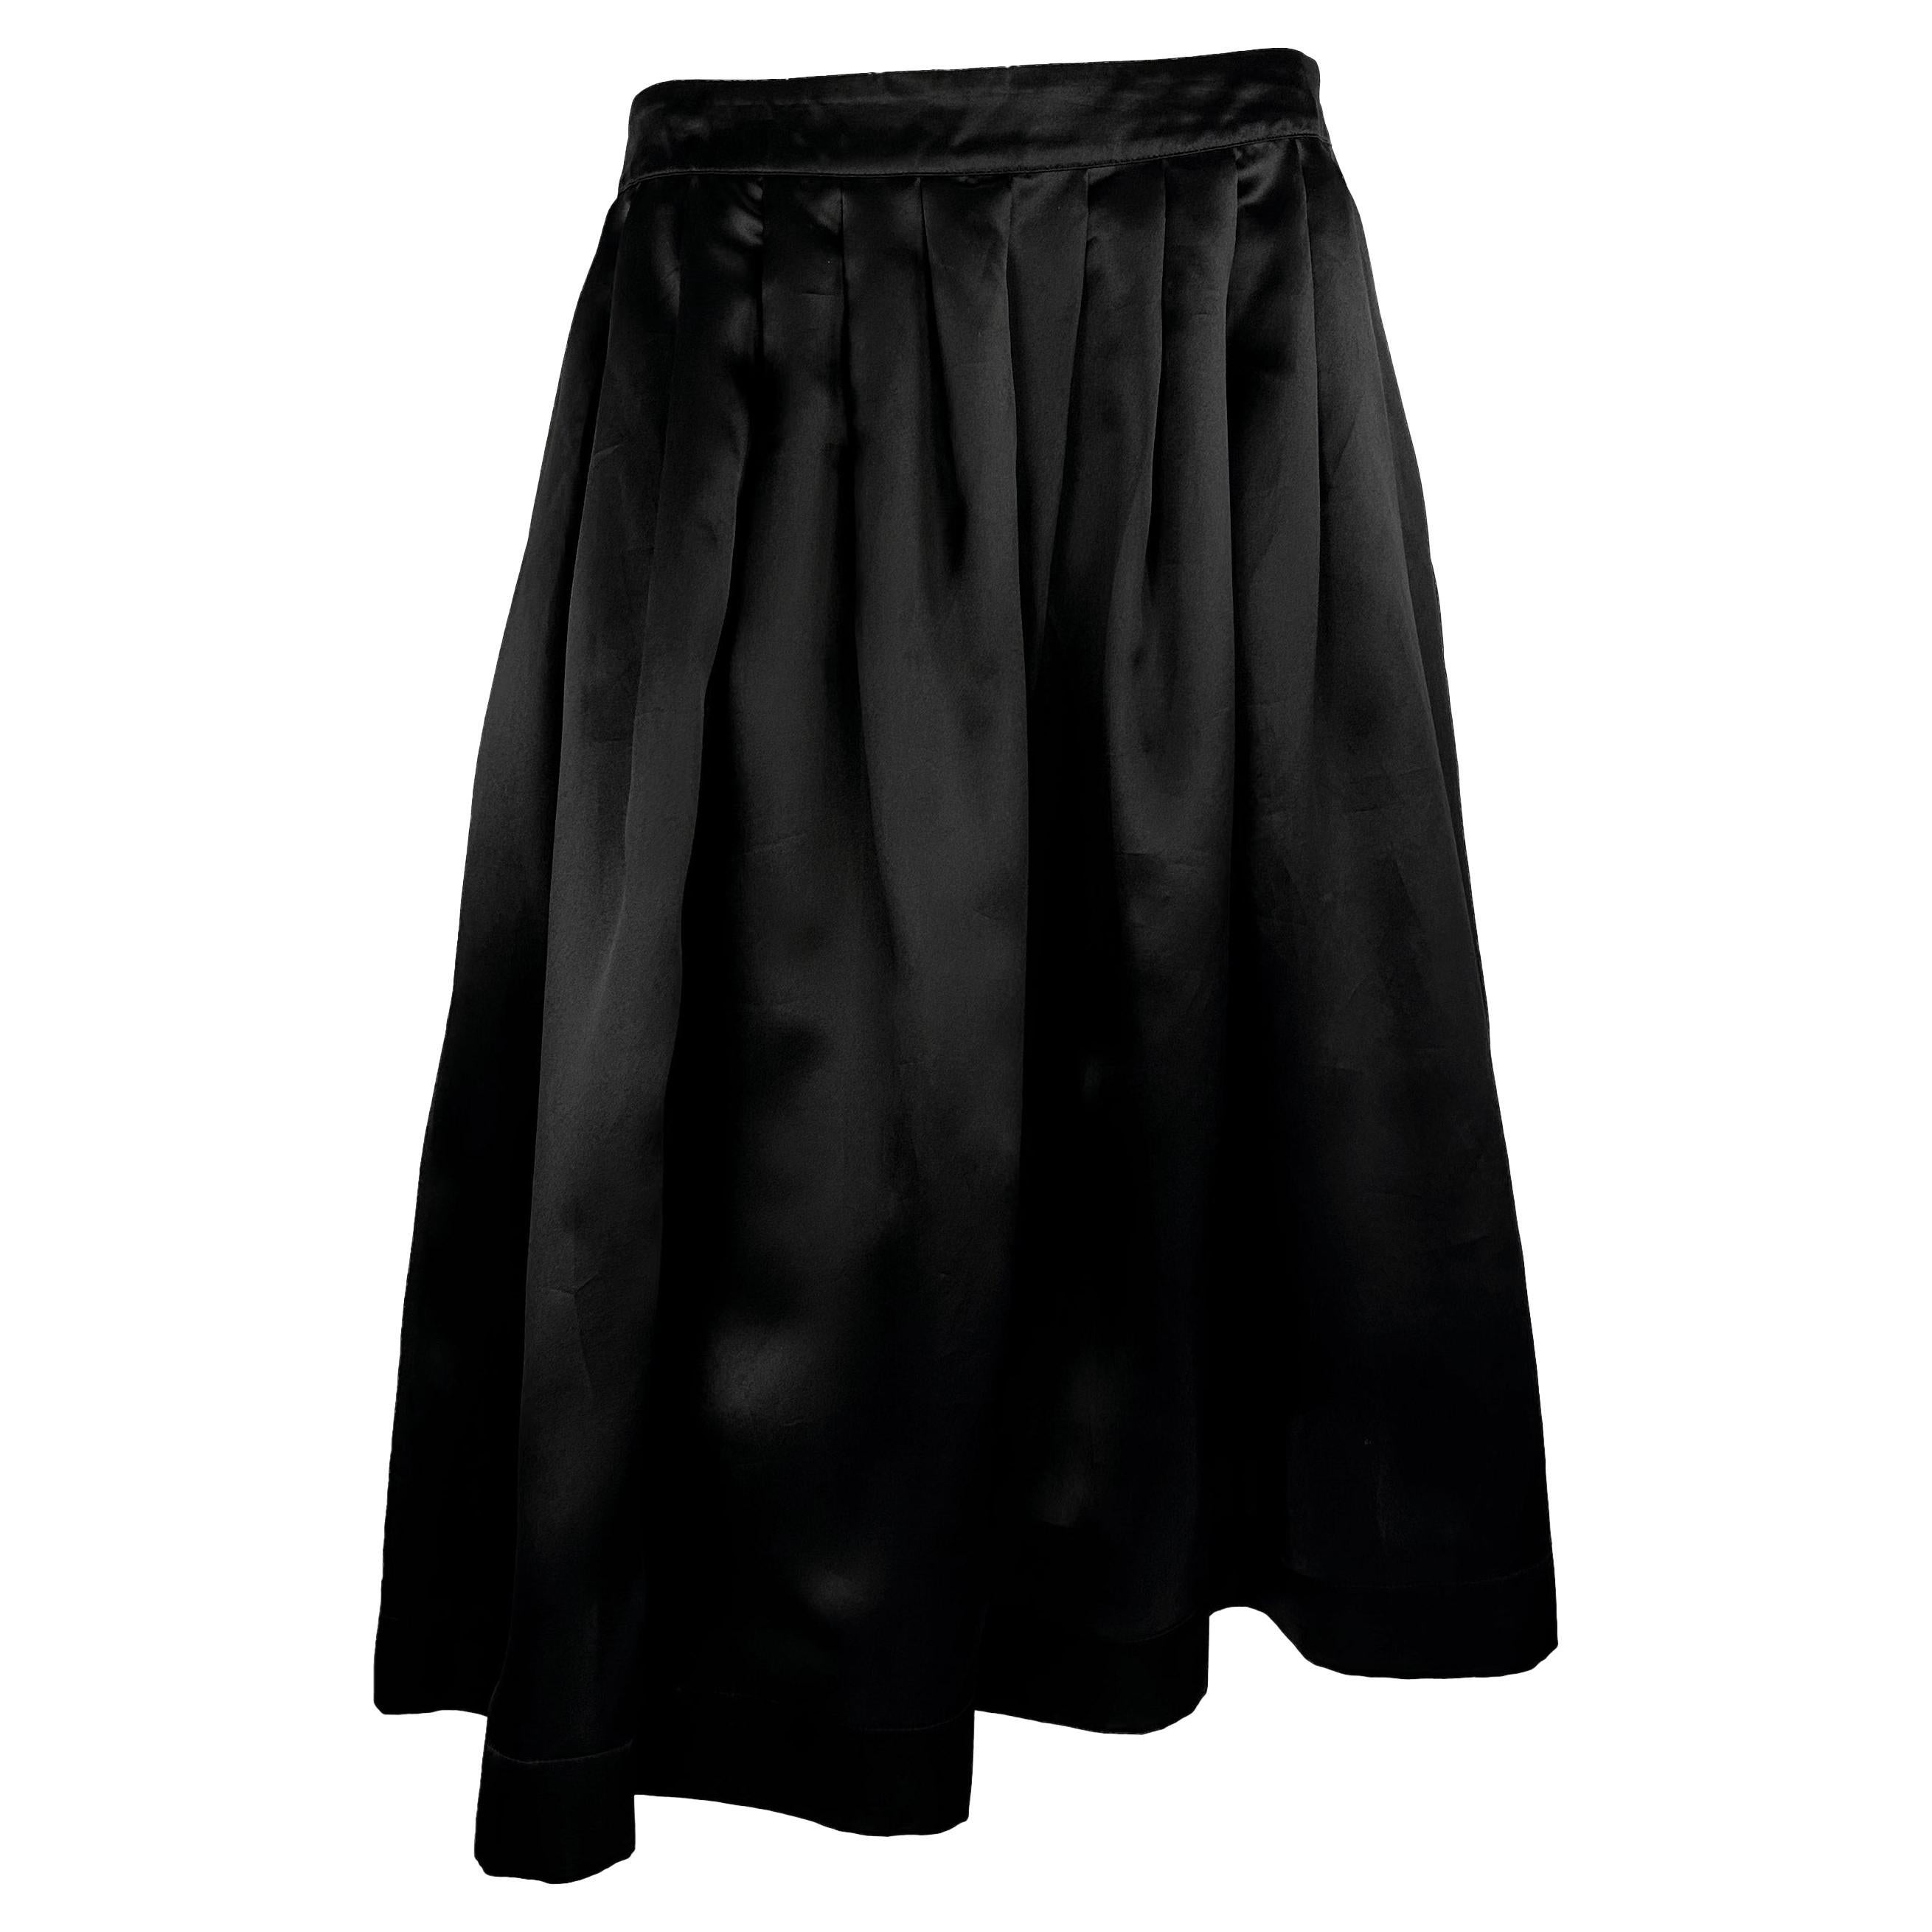 S/S 1995 Gucci by Tom Ford Runway Black Silk Satin Pleated Flare Skirt For Sale